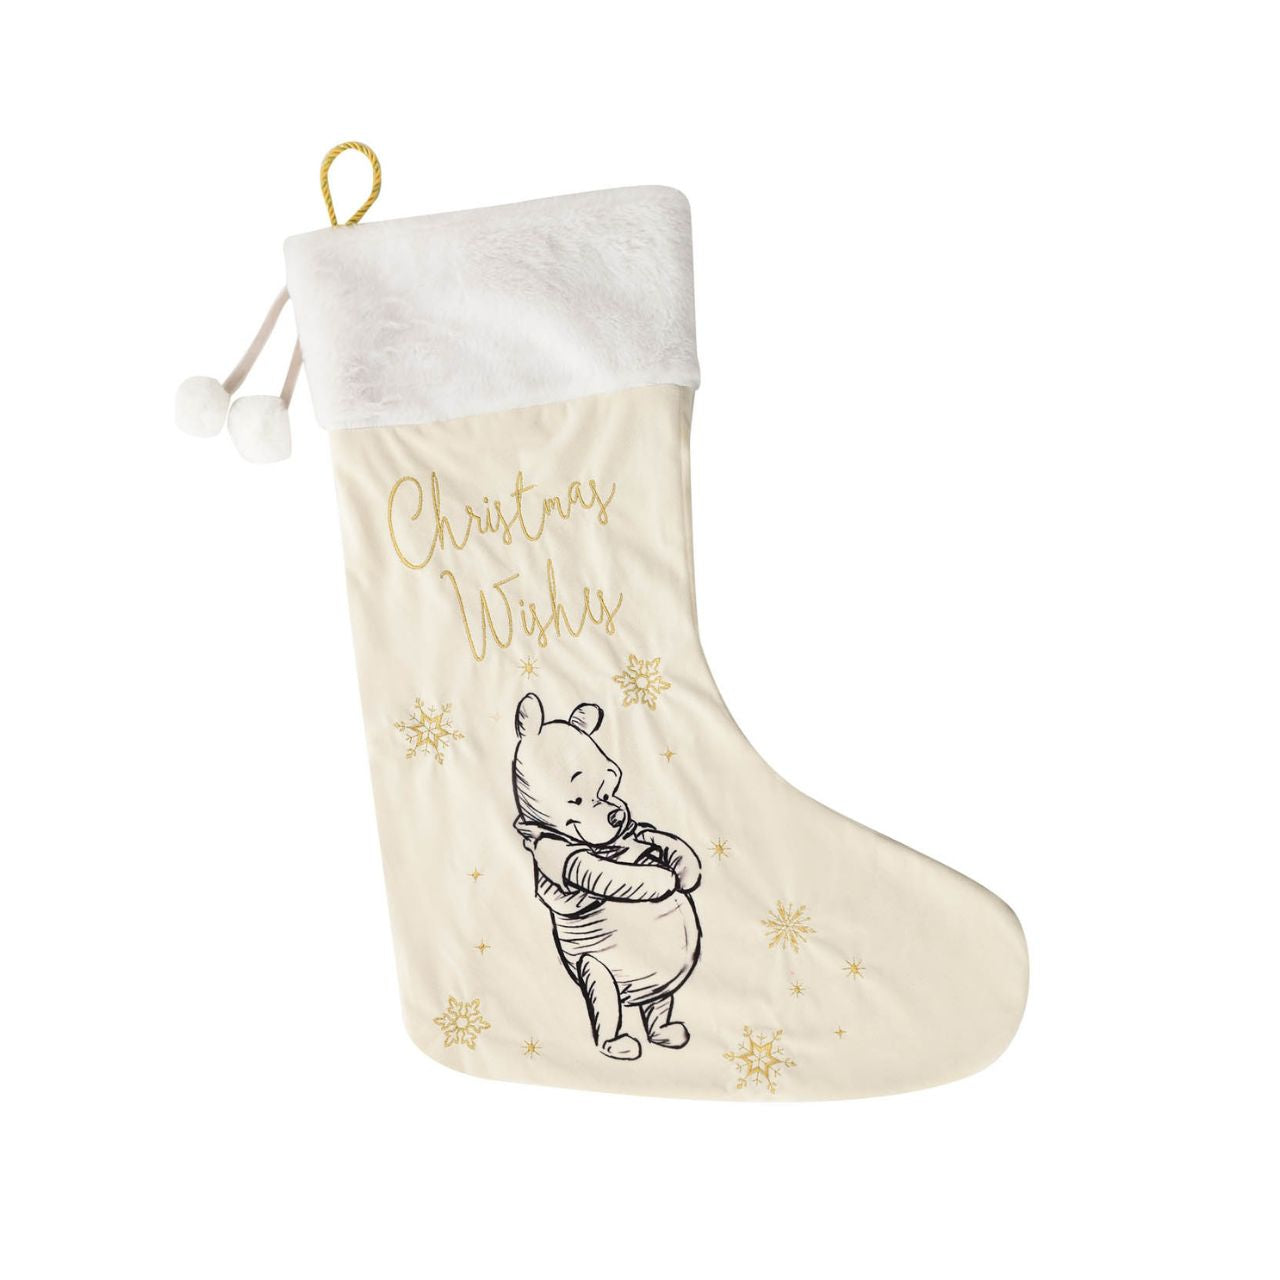 Disney Winnie The Pooh Plush Velvet Stocking  Give Santa the perfect place to leave those gifts with this beautiful white velveteen Winnie The Pooh stocking with gold embroidery. From Disney Classic Collectables - luxurious collectable gifts for the enduring Disney fan.